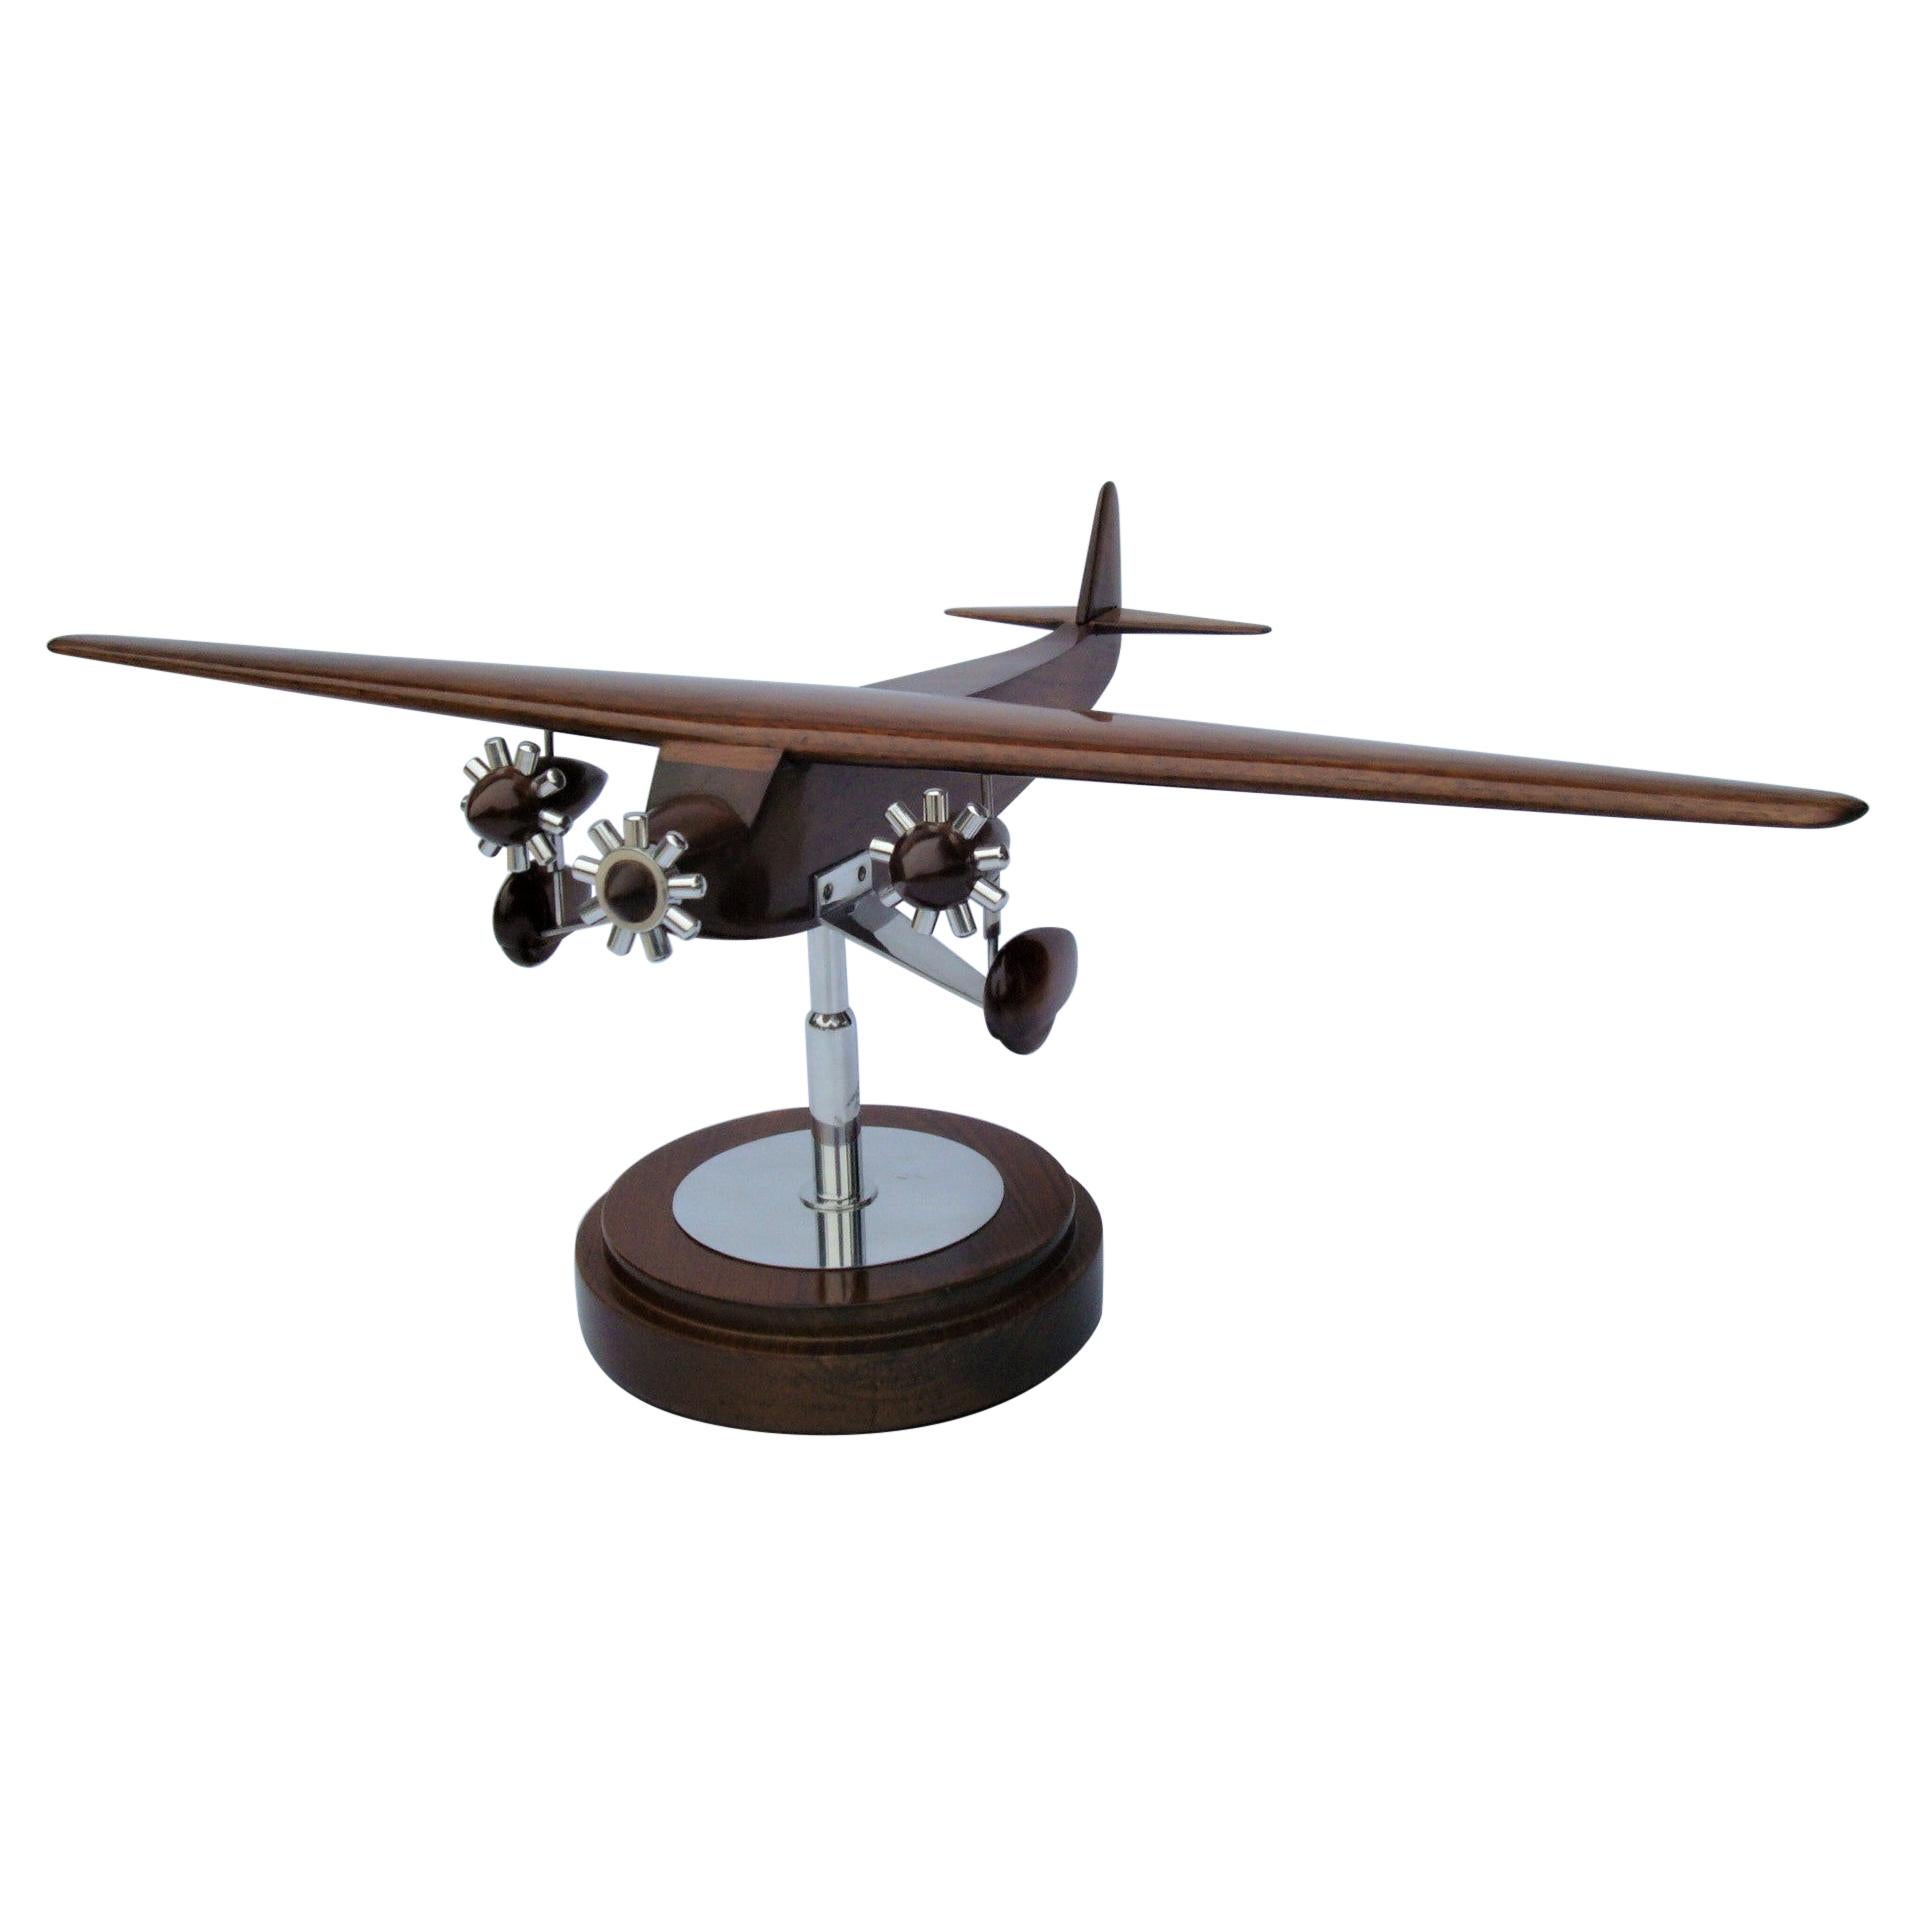 Art Deco Ford Trimotor Desk Airplane Wooden Model, ca. 1925 For Sale